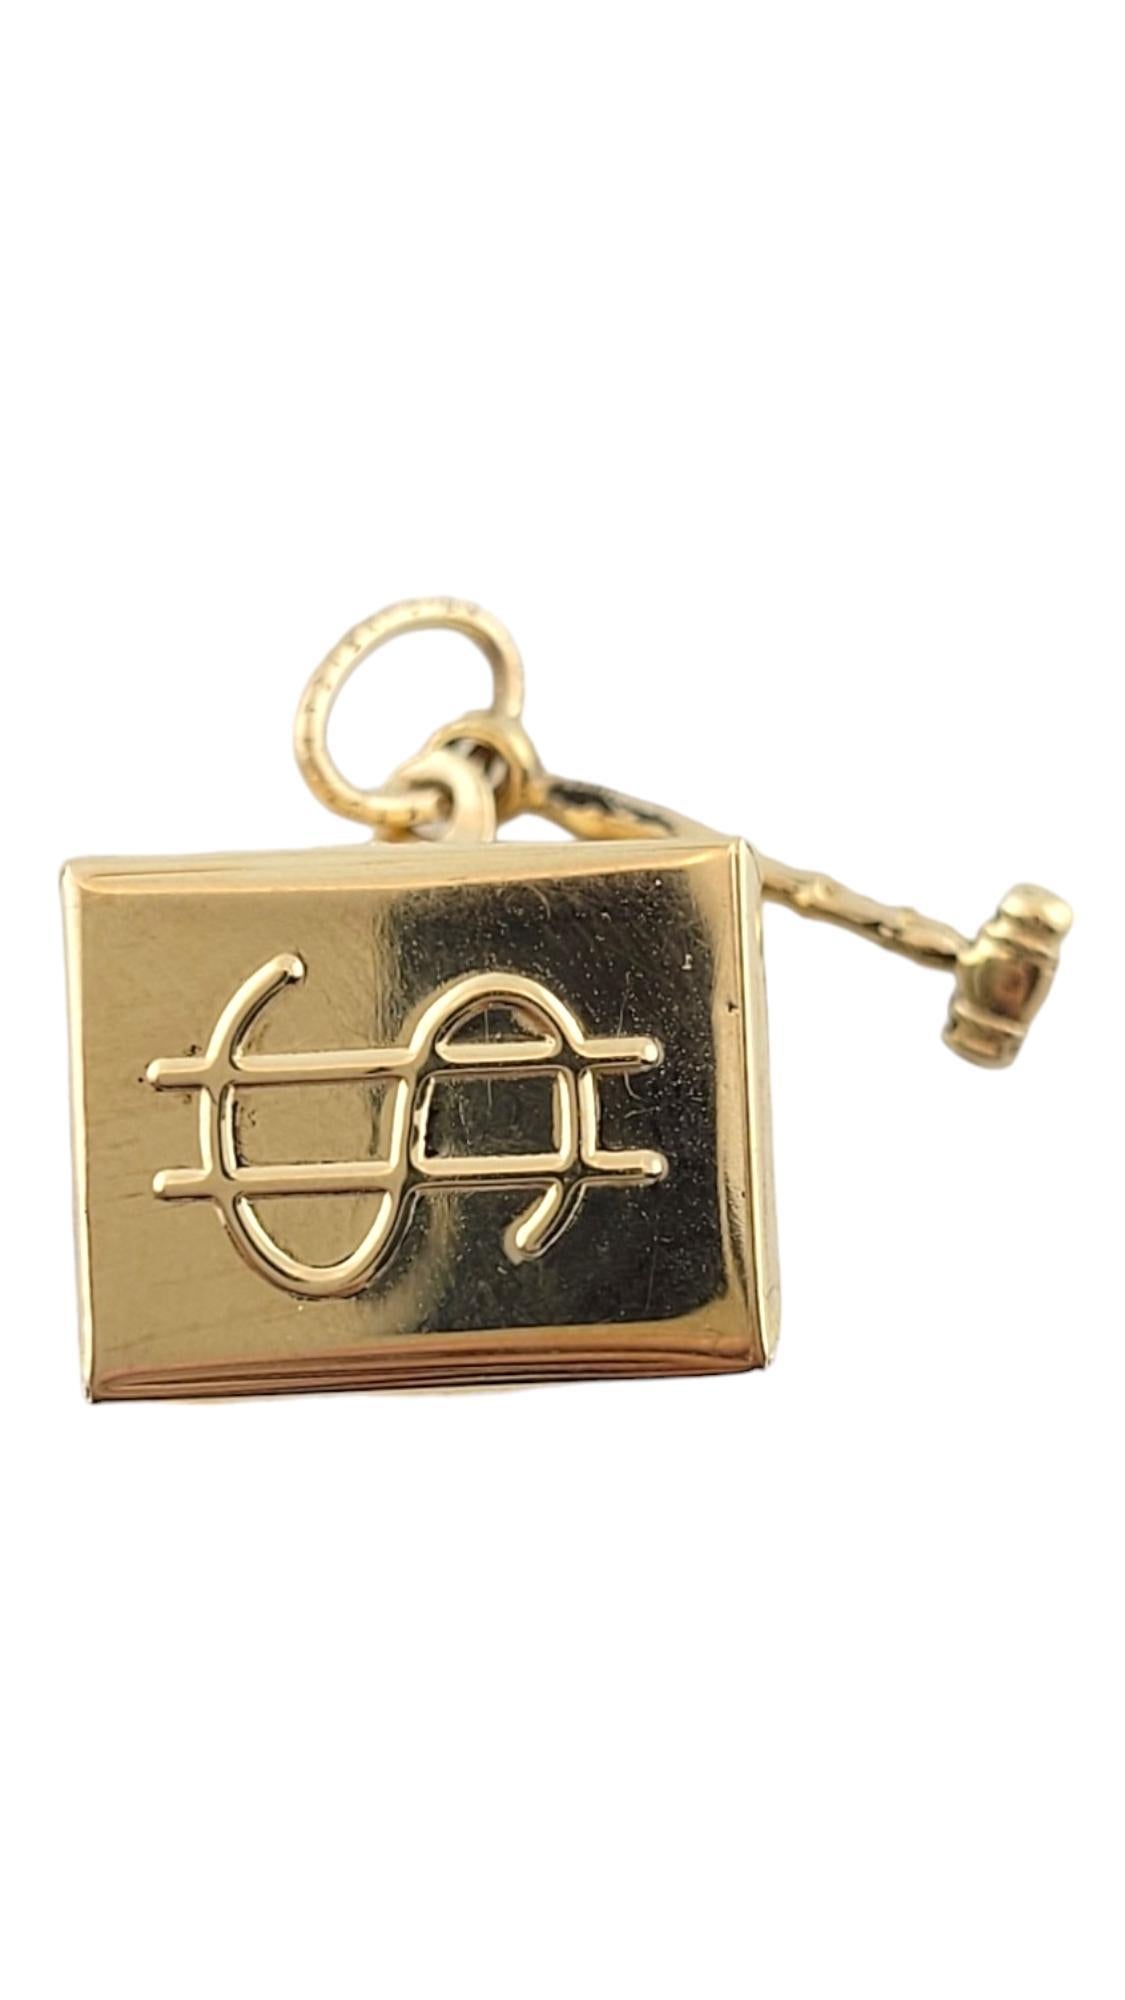 Vintage 14K Yellow Gold Mad Money Box Charm

This beautiful mad money box charm is crafted form 14K yellow gold!

Size: 14.8mm X 11.9mm X 11.8mm

Weight: 1.9 dwt/ 3.1 g

Hallmark: TC 14K

Very good condition, professionally polished.

Will come